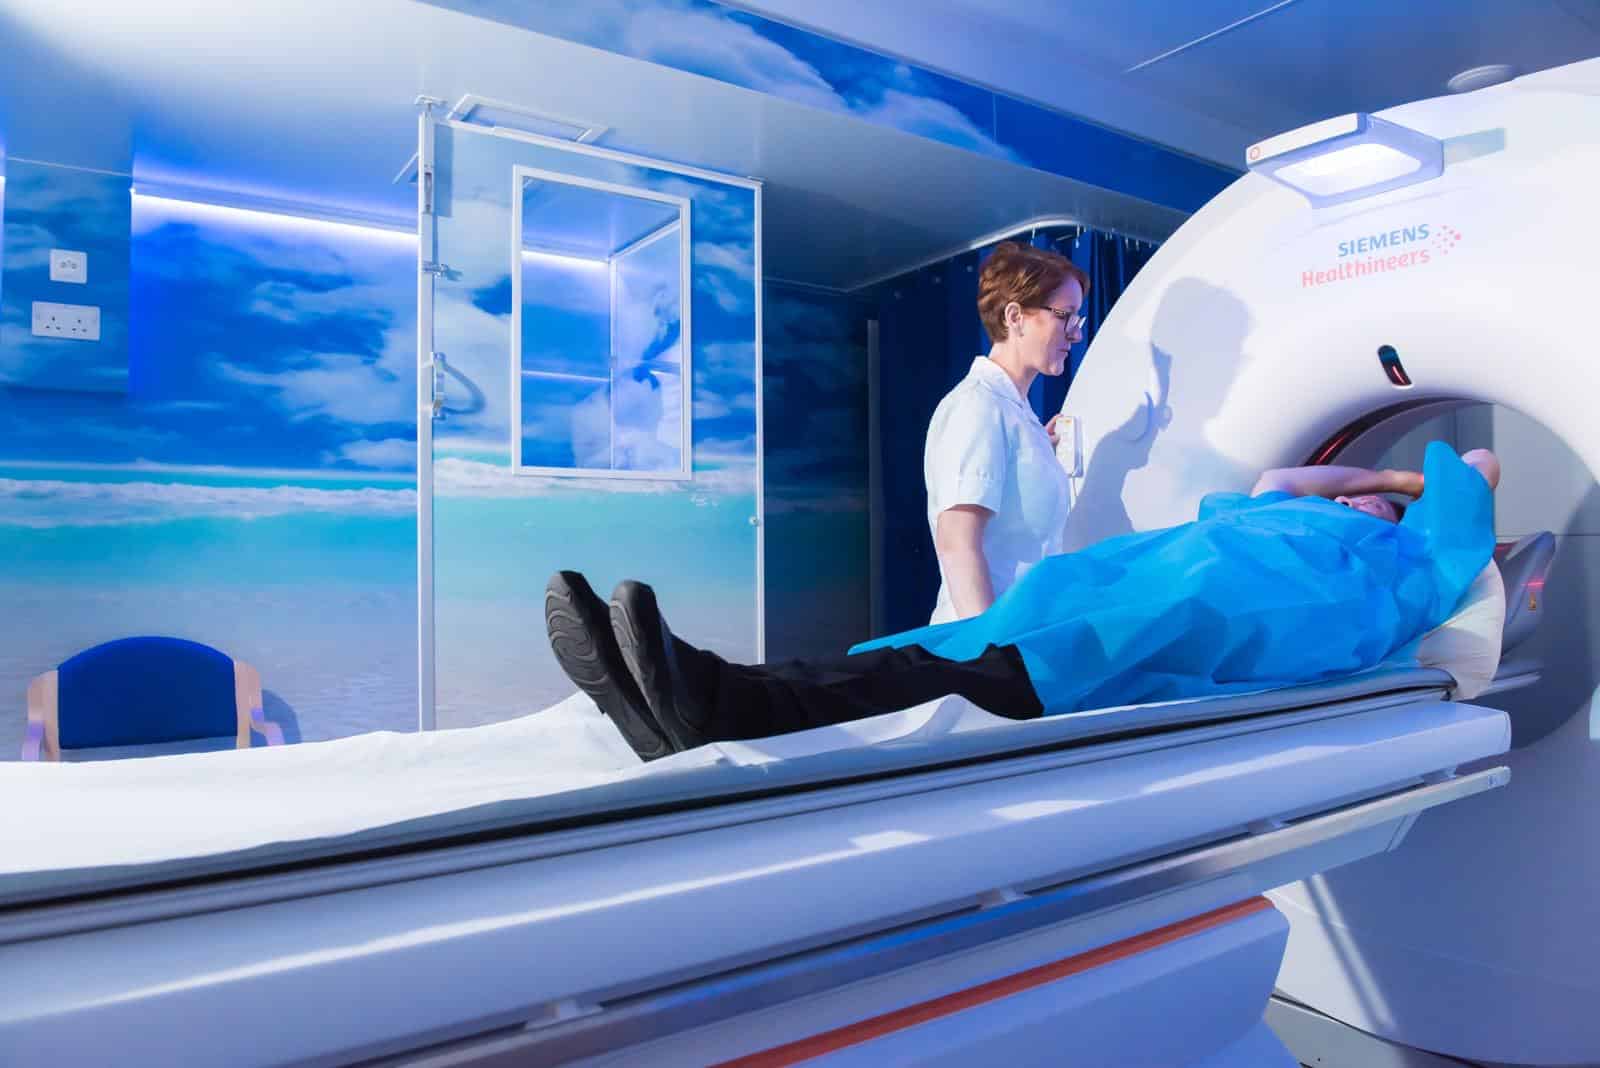 picture of a person in a blue hospital gown laying on the bed of a CT scanner with their hands above their head and a nurse next to them operating the scanner